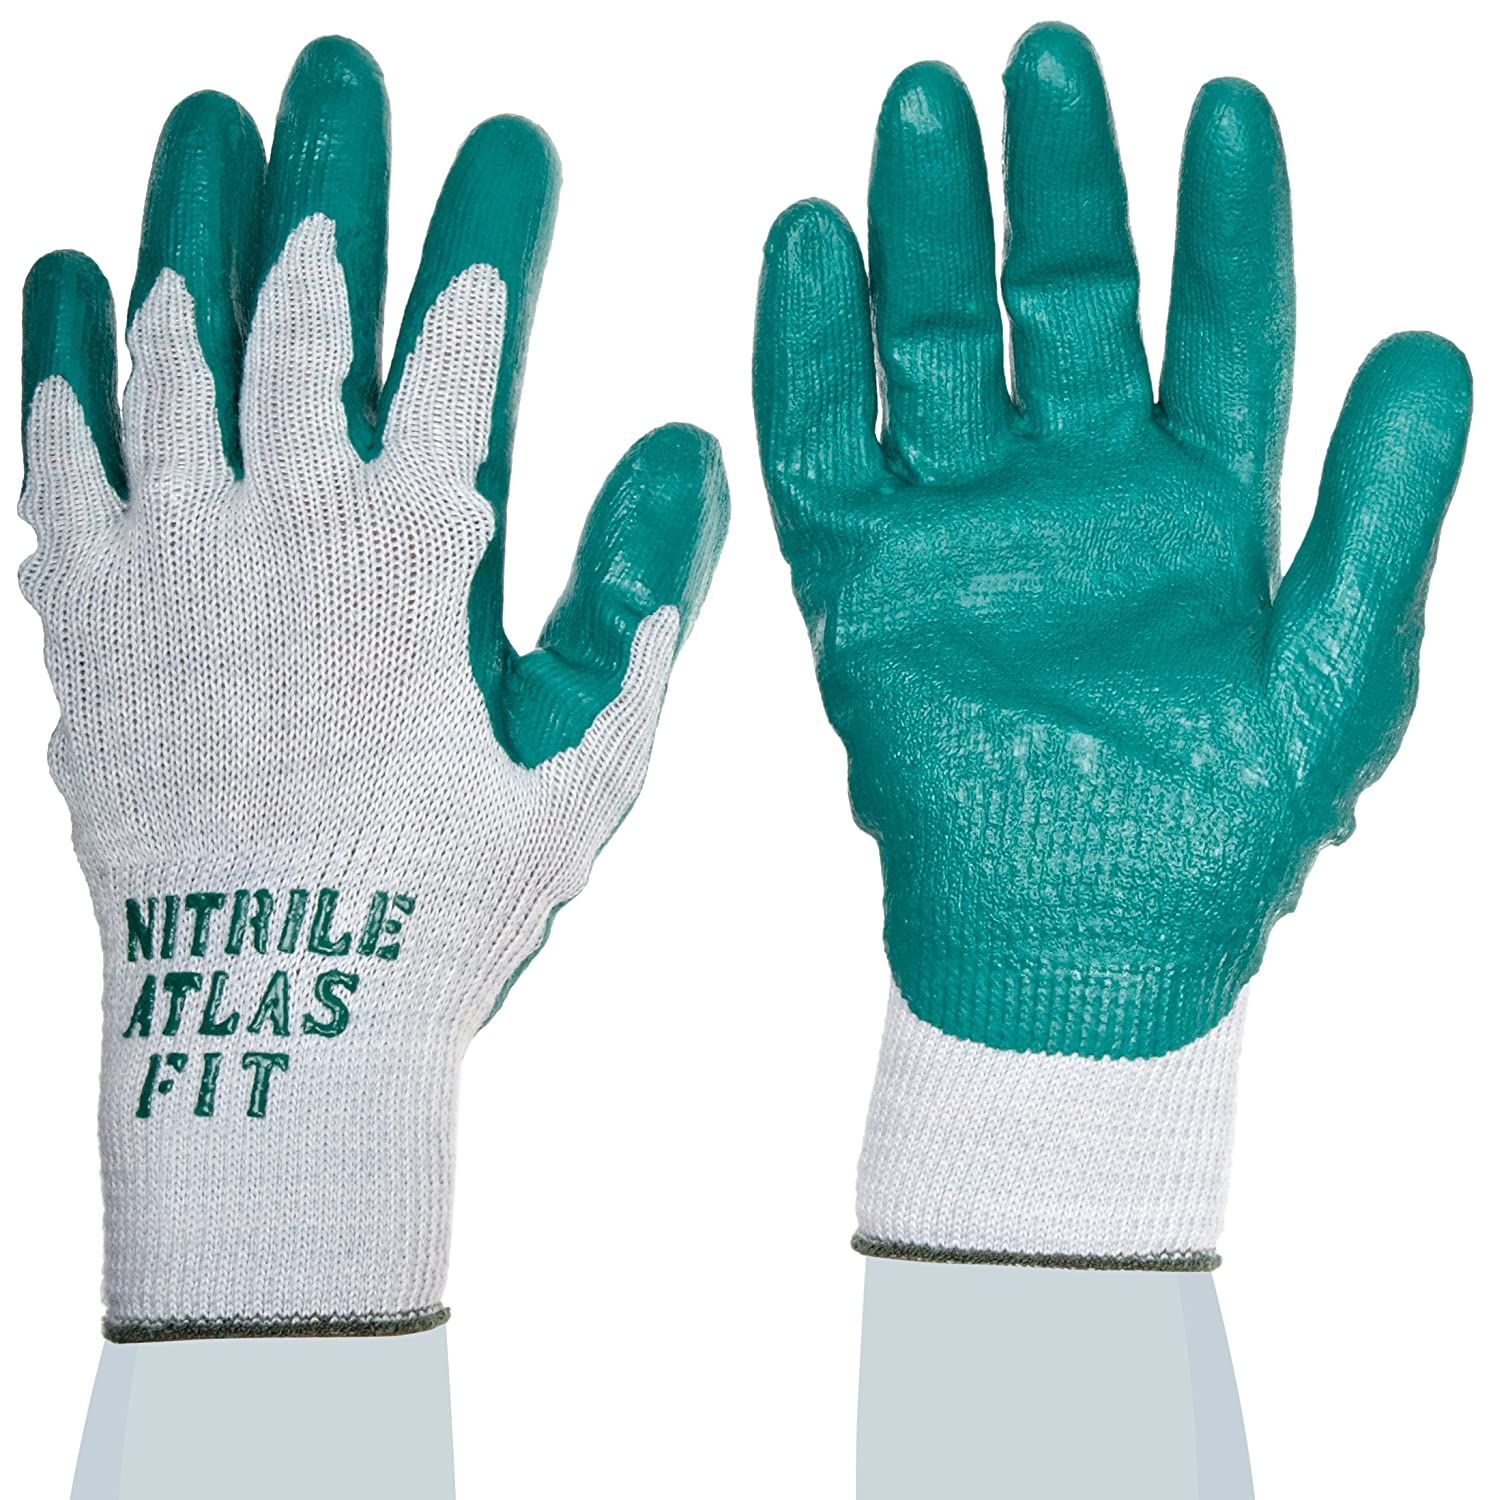 Nitrile palm coating,  Hi vis yellow/green coating, 10 gauge seamless cut resistant liner made with polyester/stainless steel, Hagane Coil™ Technology, large, ANSI CUT LEVEL A4 - Cut Resistant